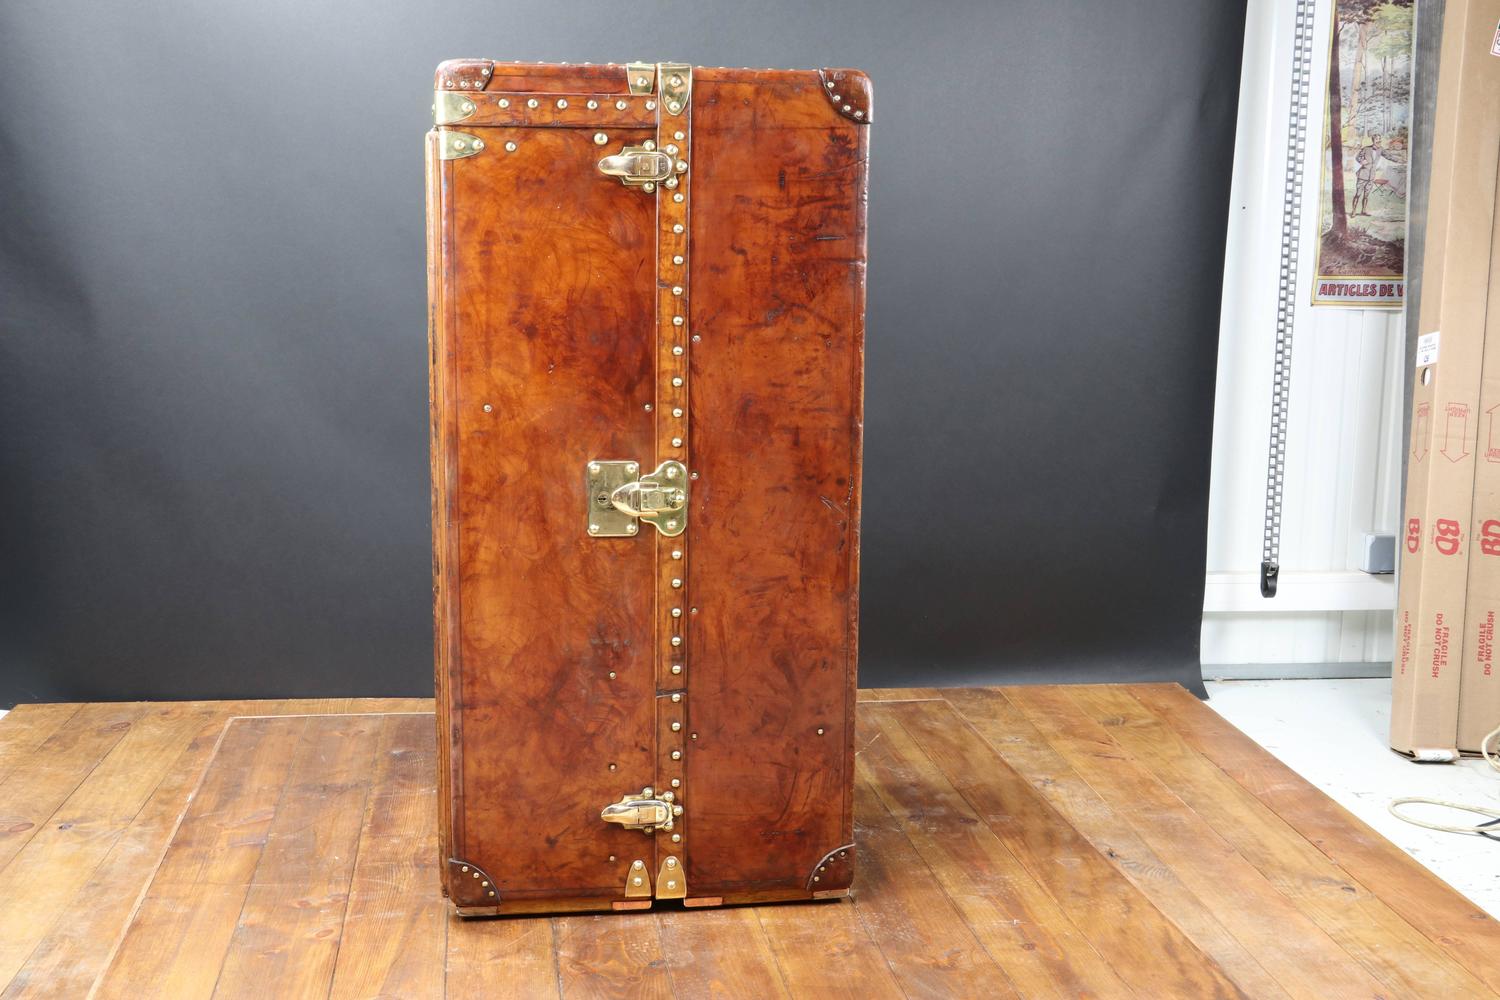 1920s Louis Vuitton Wardrobe Natural Leather Wonderful Patina For Sale at 1stdibs